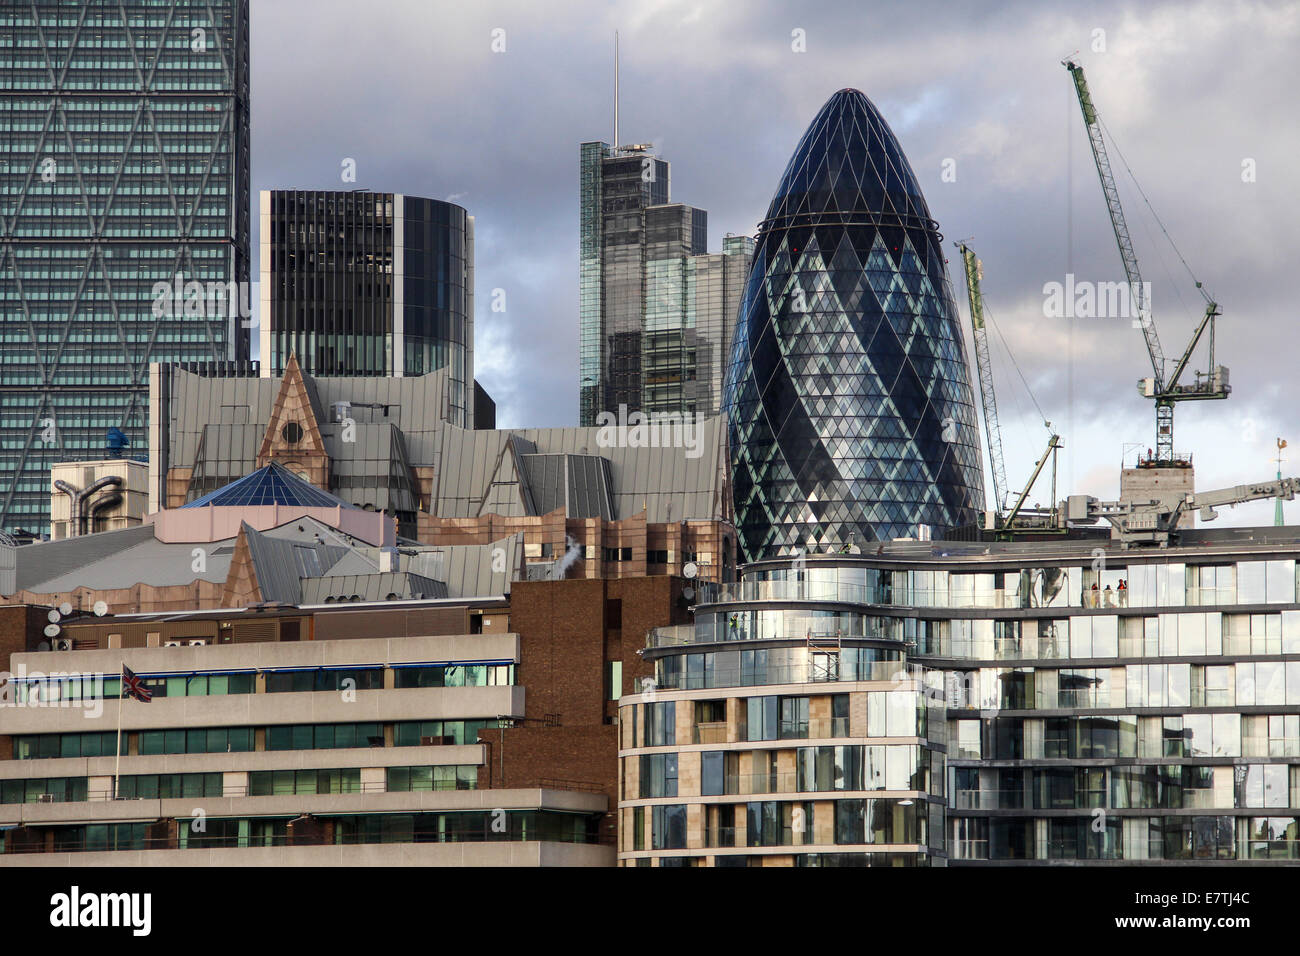 England: City of London with 30 St Mary Axe (the Gherkin). Photo from 10. January 2014. Stock Photo